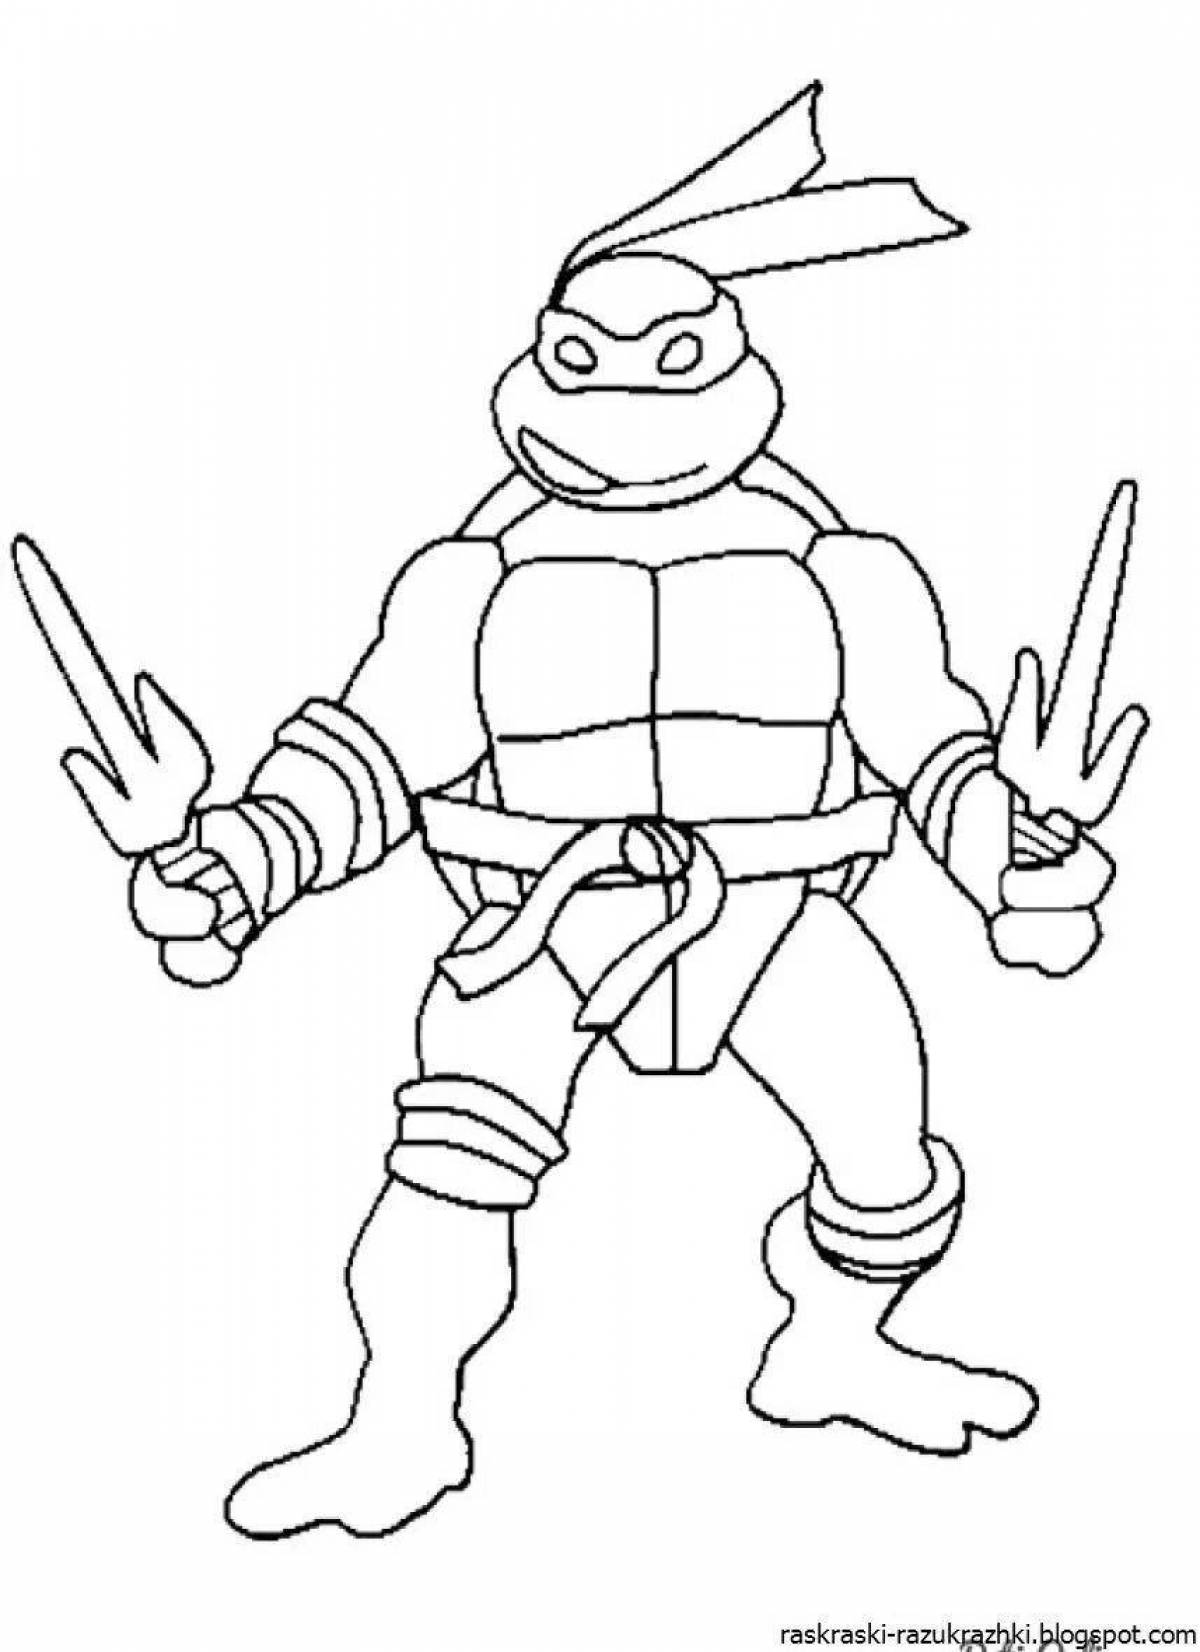 Gorgeous Teenage Mutant Ninja Turtles Coloring Pages for Toddlers